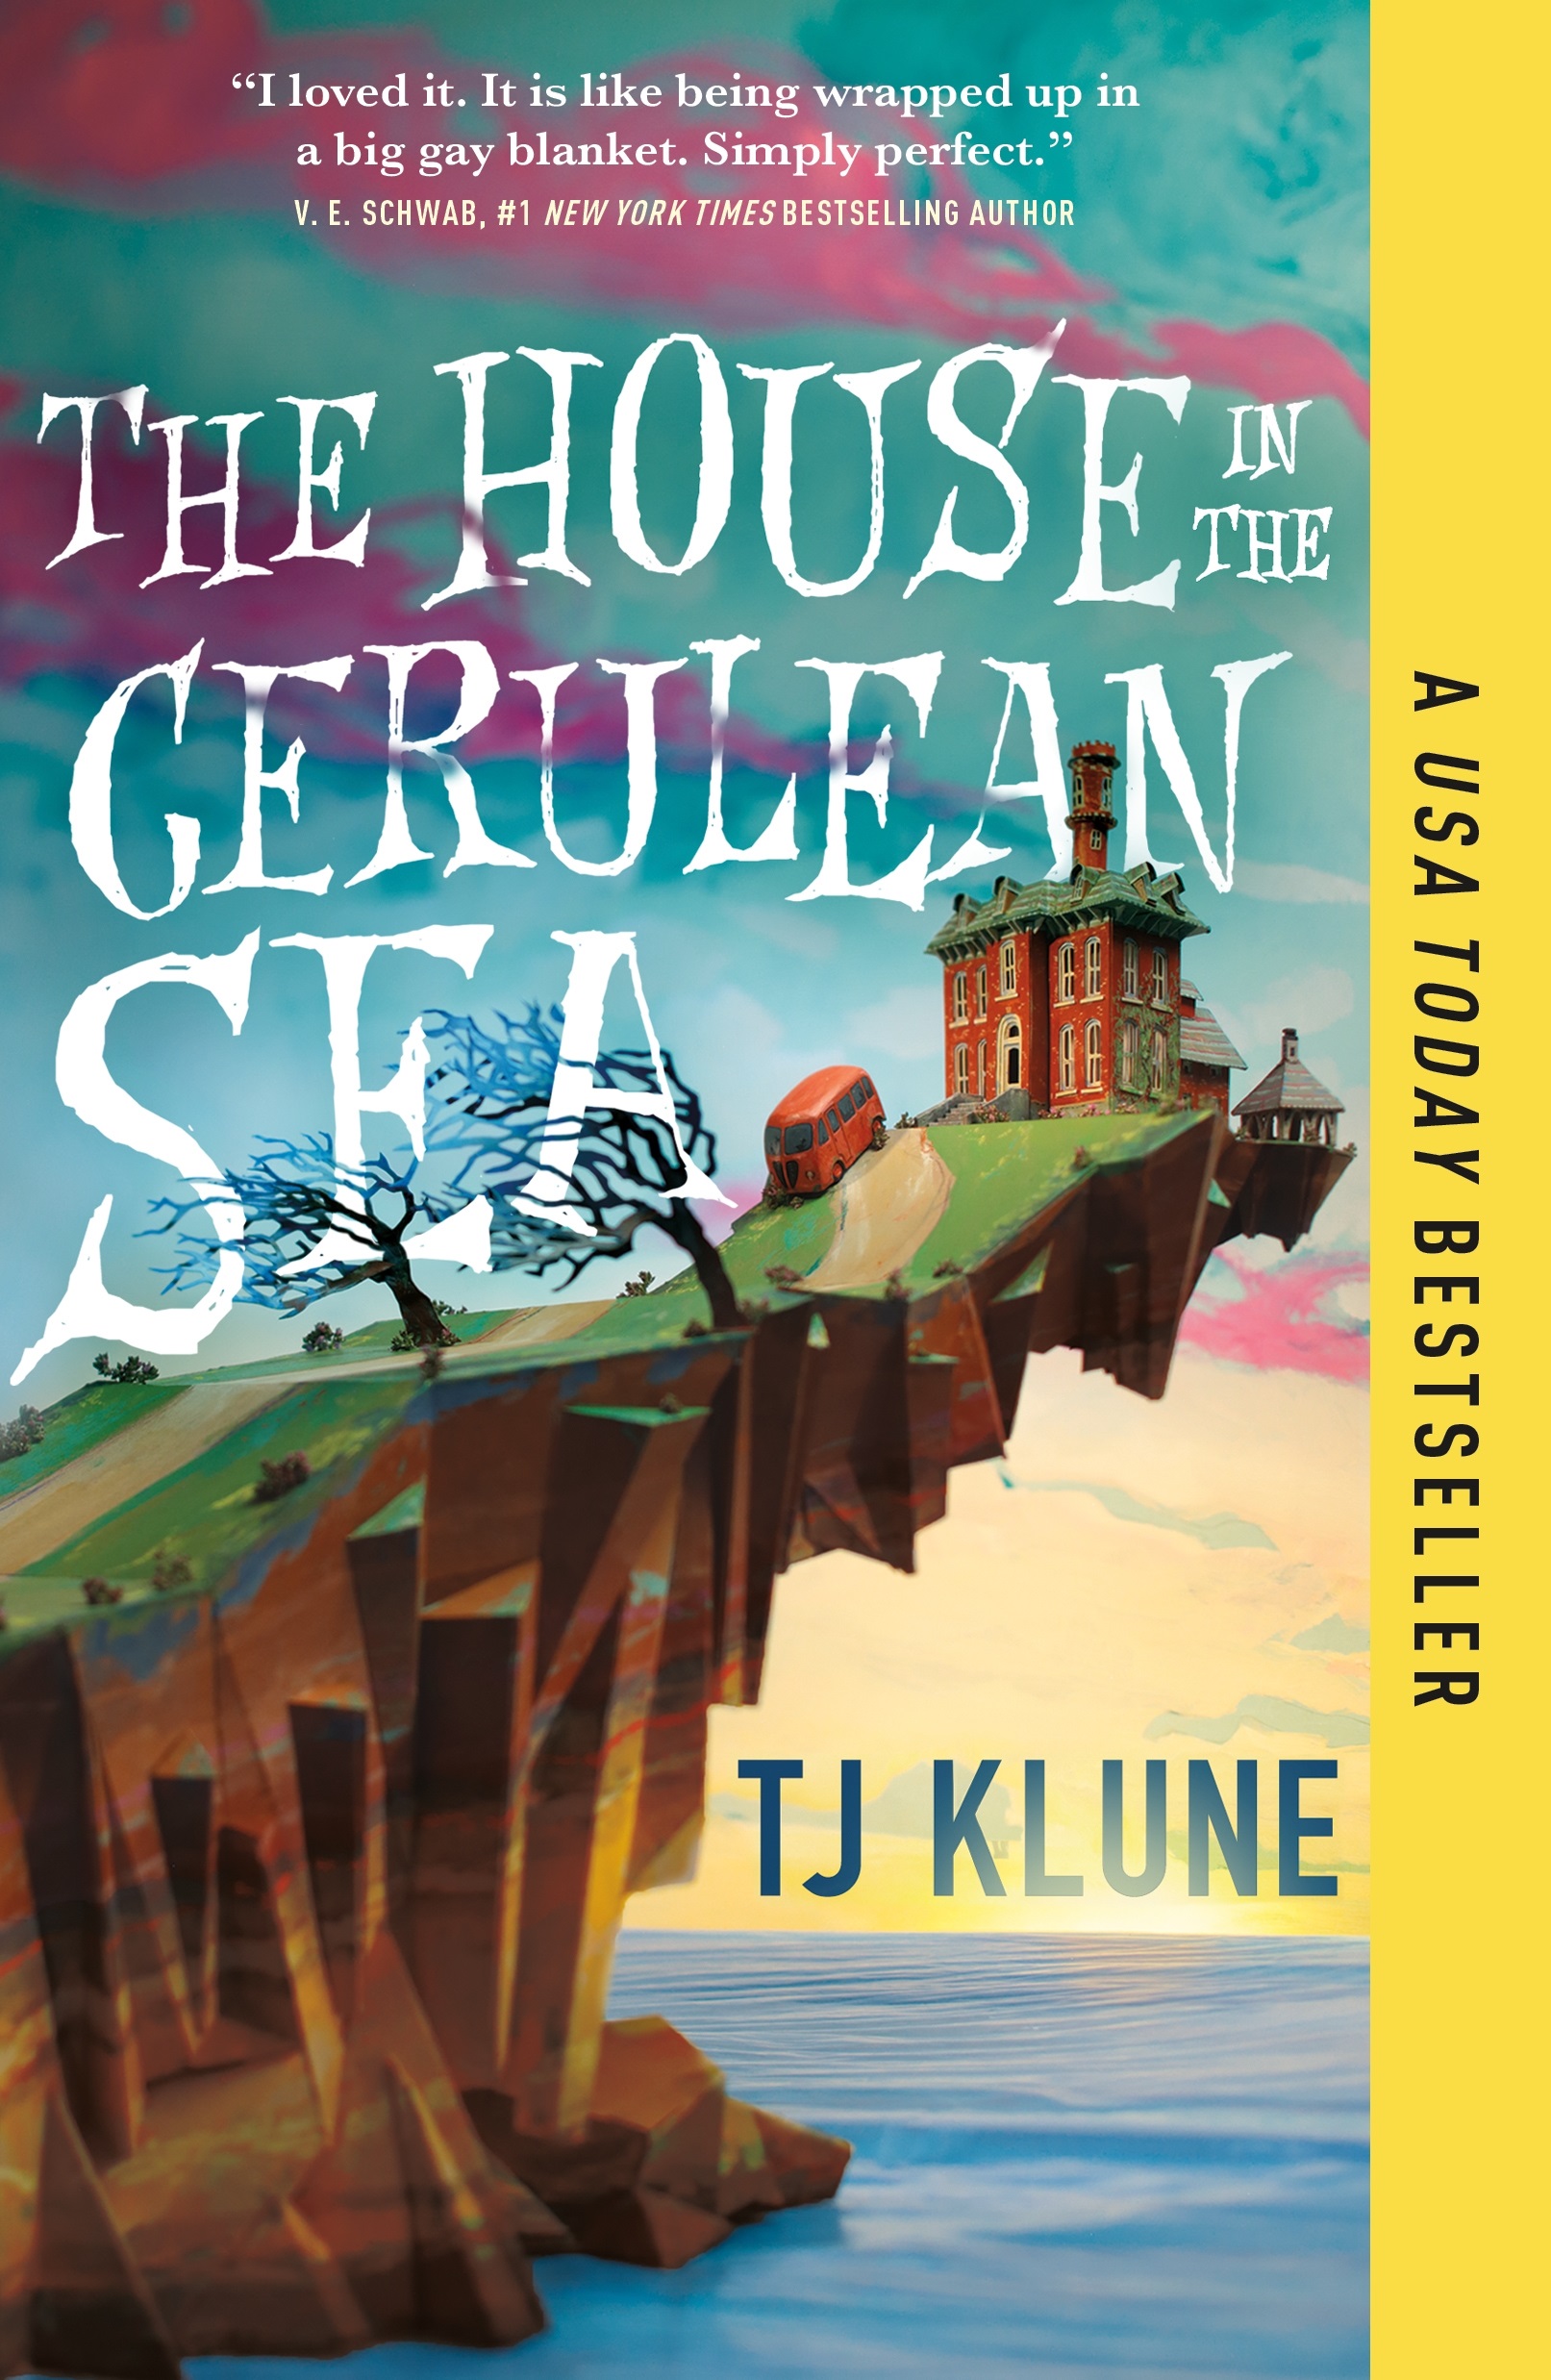 The House in the Cerulean Sea cover